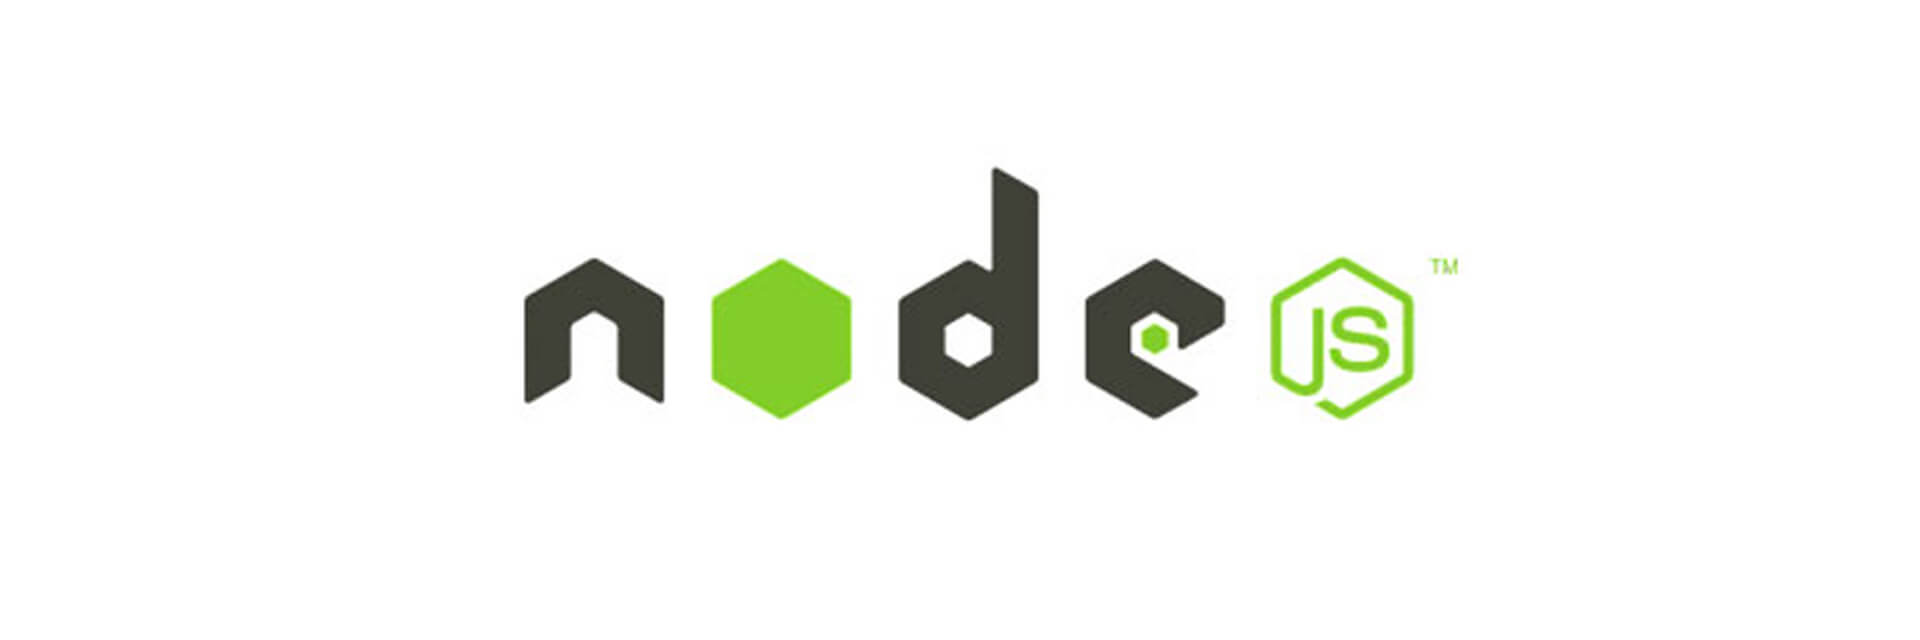 Node.Js Foundation To Shepherd Express Web Framework: The End Goal Is To Maintain Stability